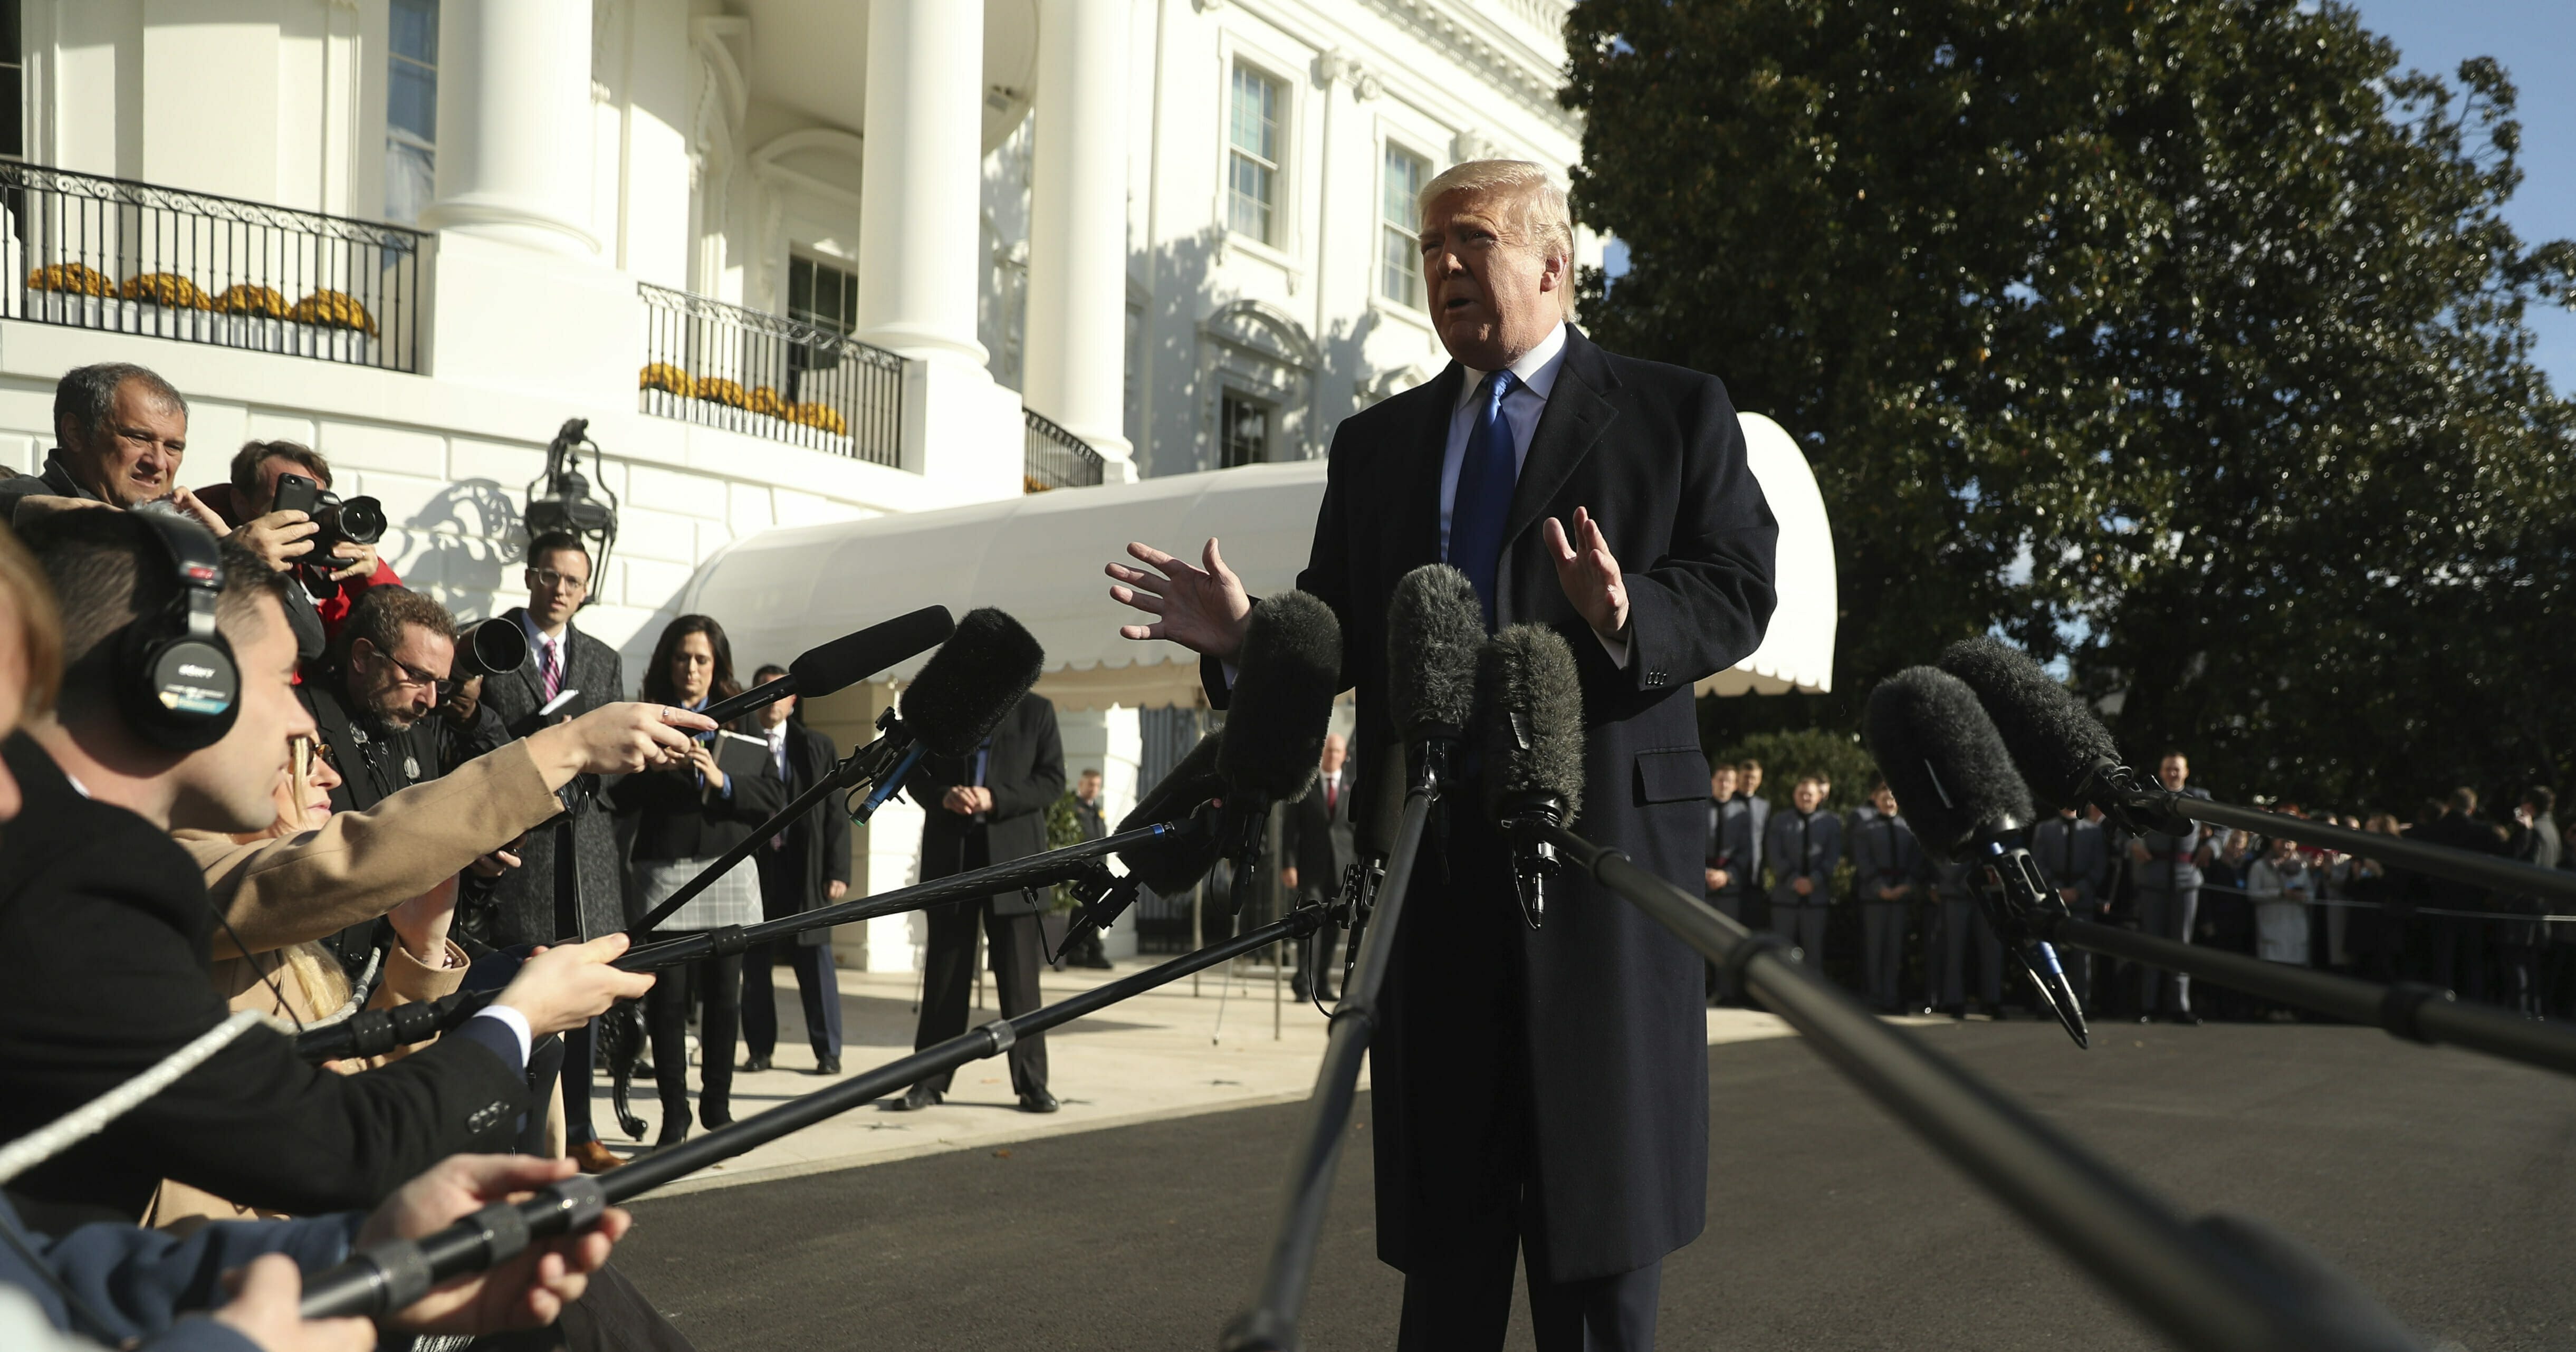 President Donald Trump speaks to reporters on the South Lawn of the White House in Washington on Nov. 8, 2019.